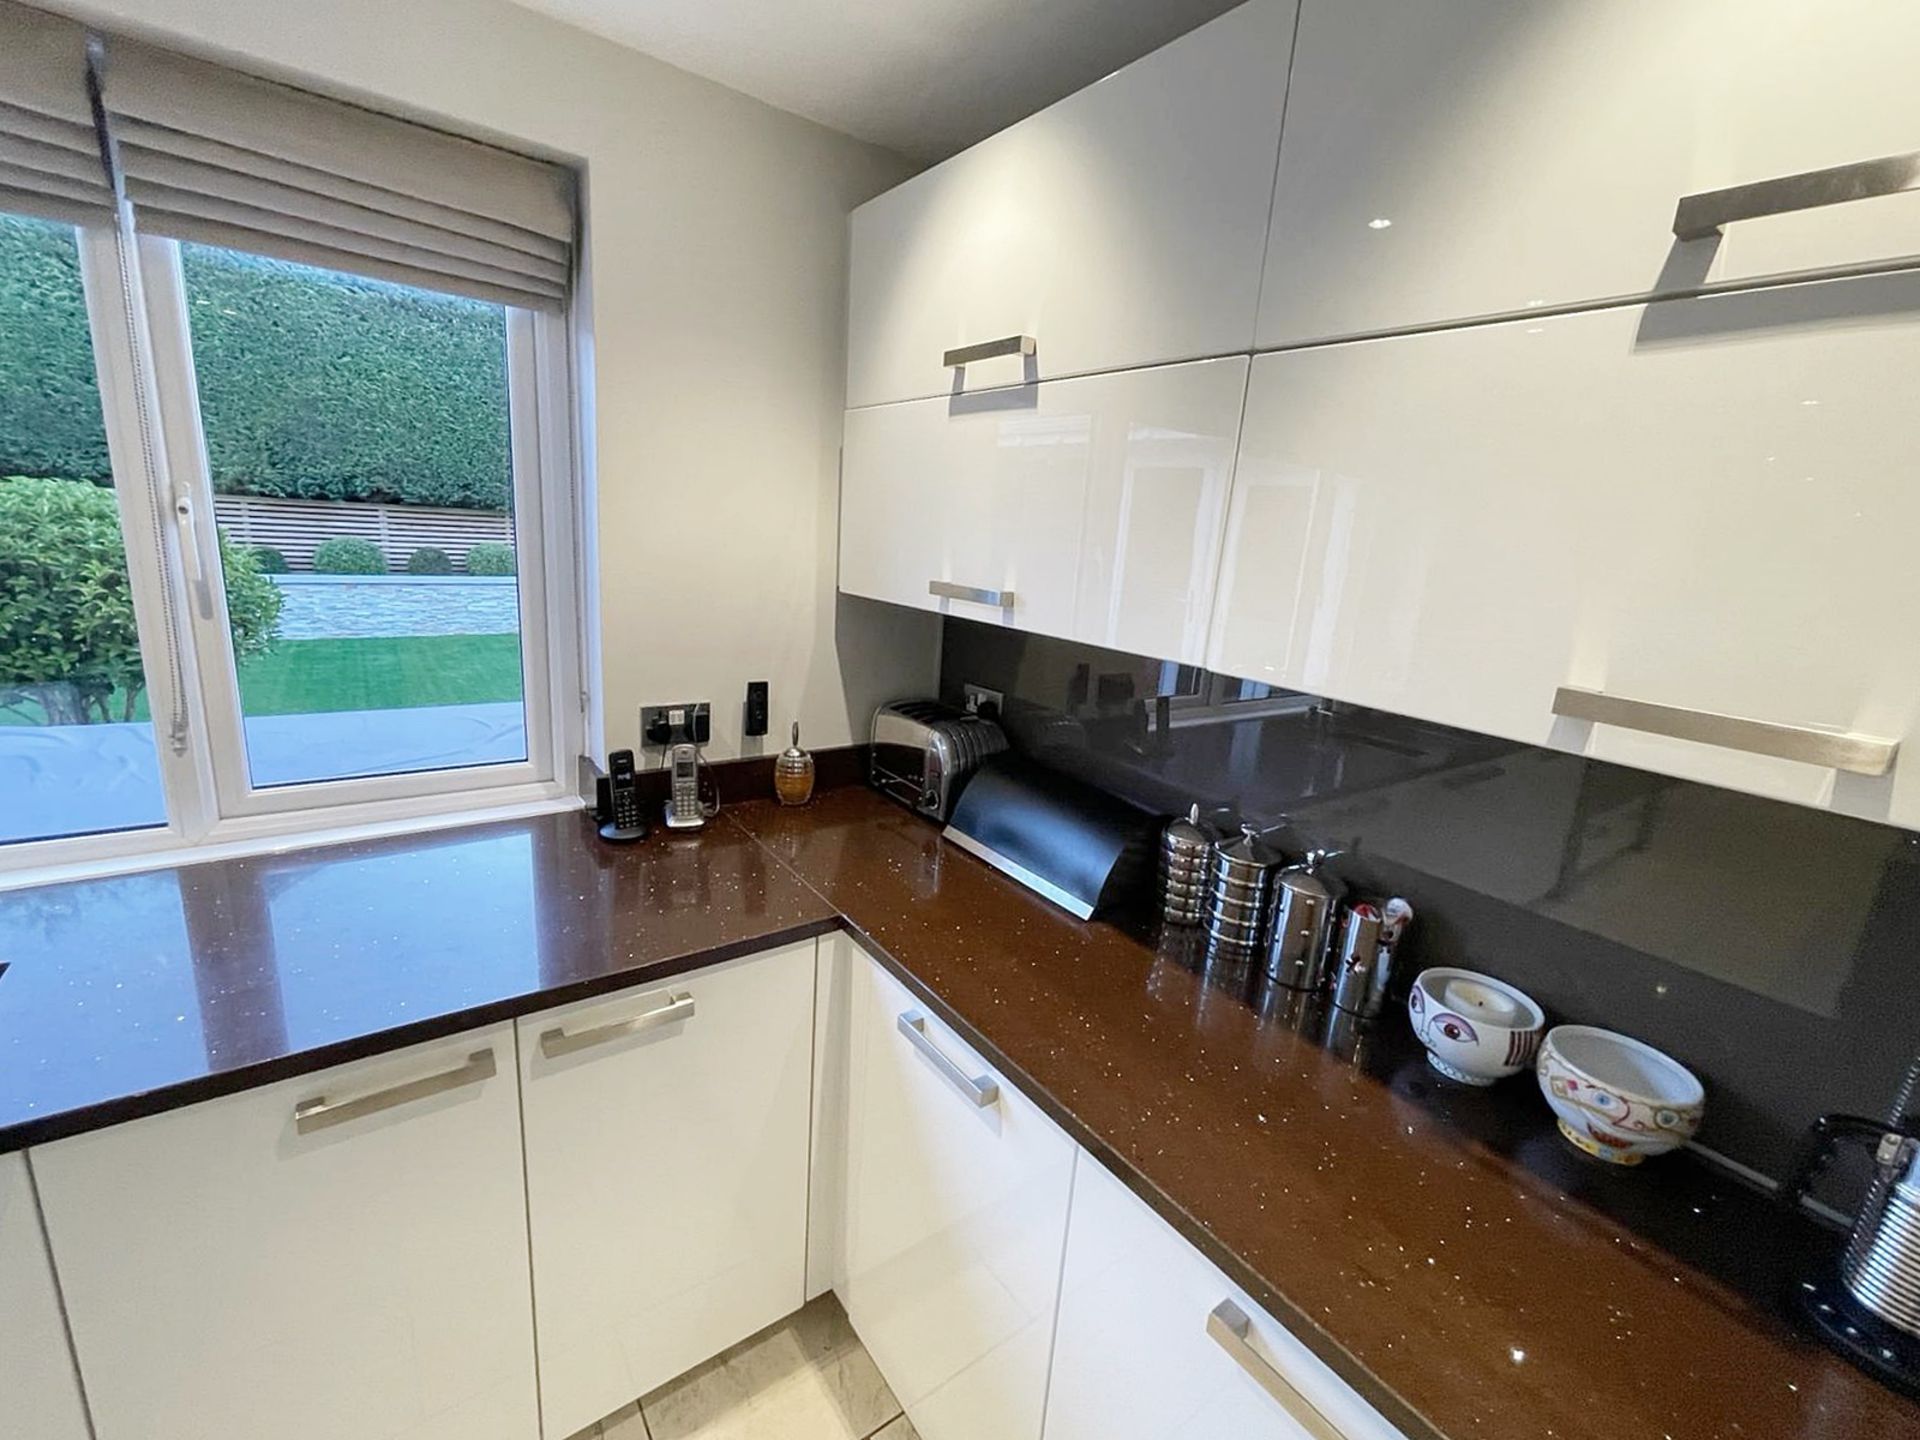 1 x ALNO Bespoke Fitted White Kitchen with Central Island, Neff & Miele Appliances, Quartz Surfaces - Image 39 of 85